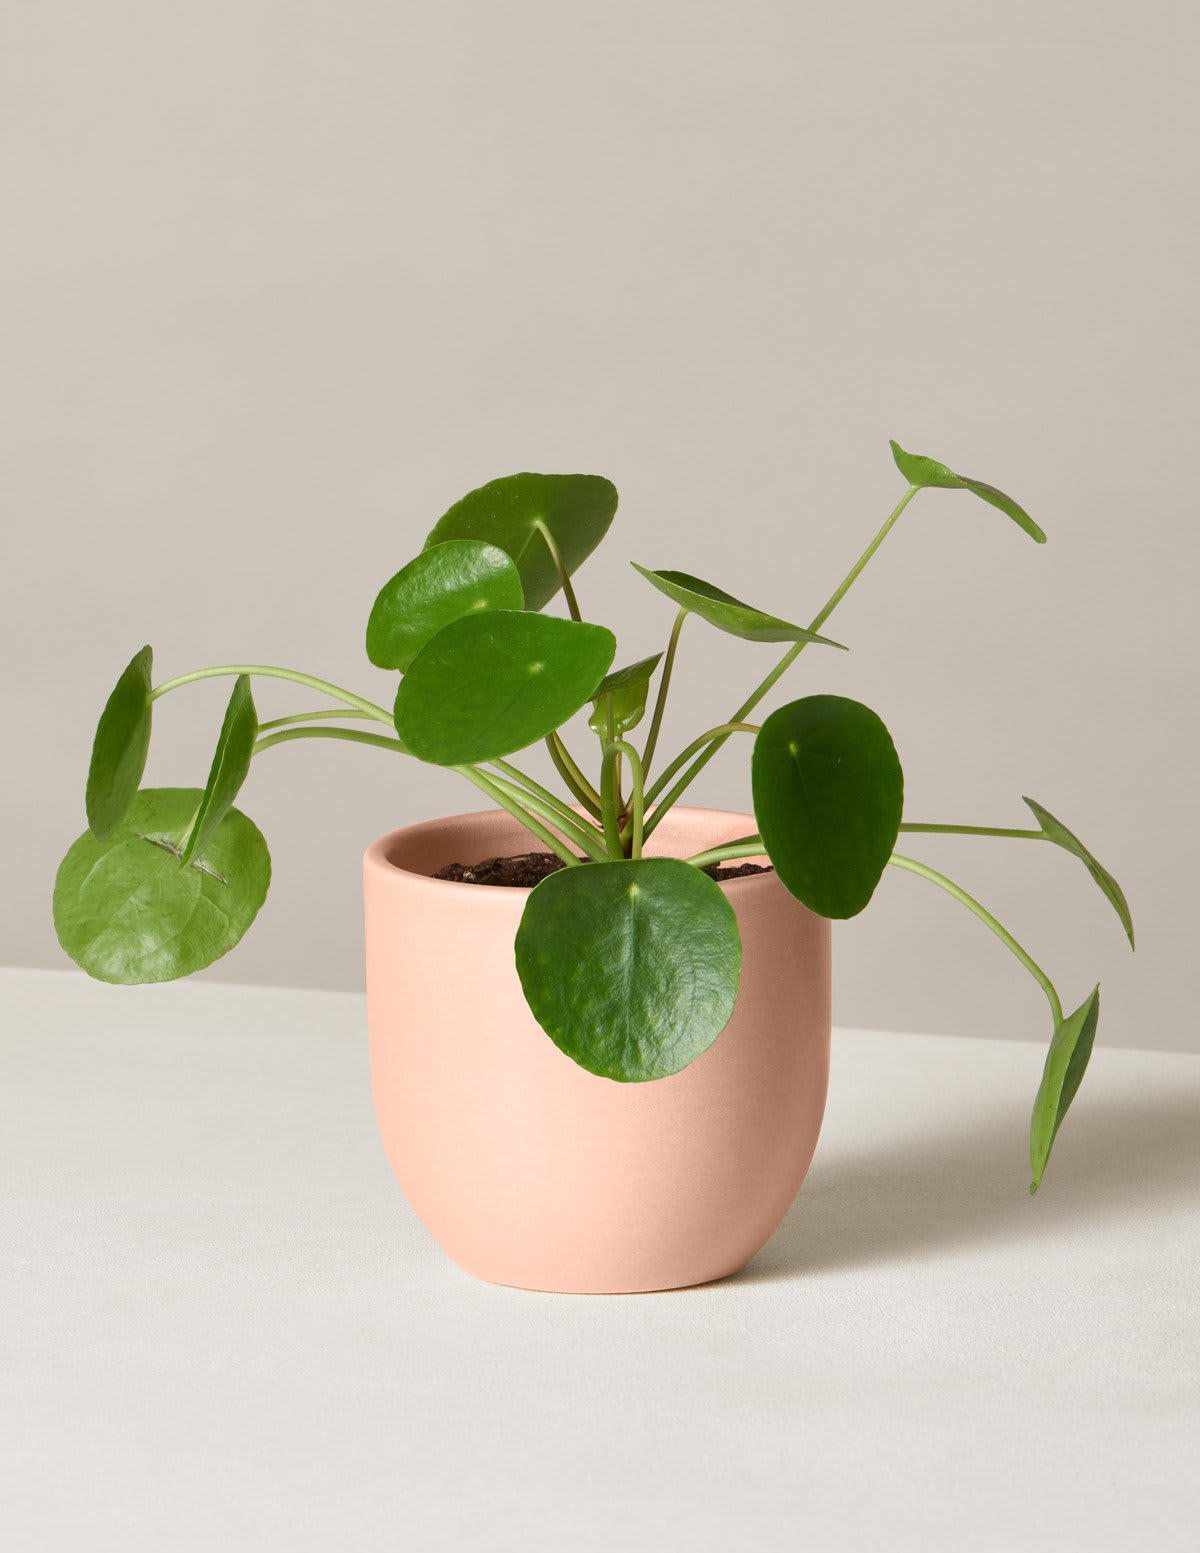 Whether to Keep Your Plant in Its Grow Pot or Pot It - The Sill